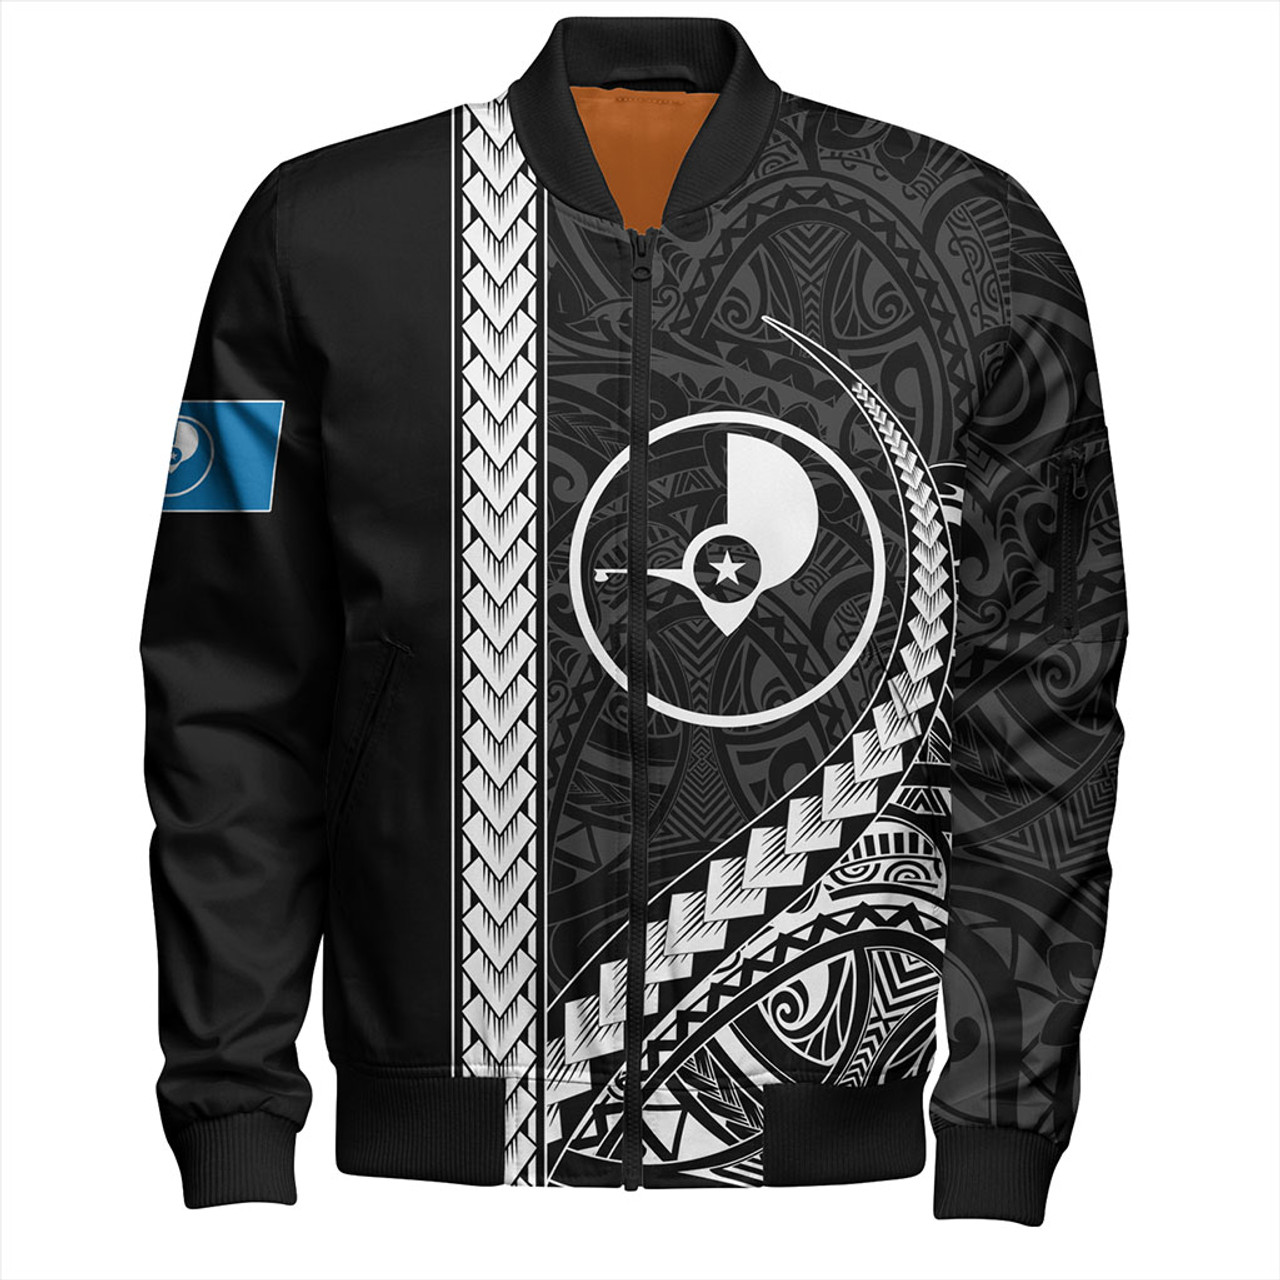 Yap State Bomber Jacket Tribal Micronesian Coat Of Arms